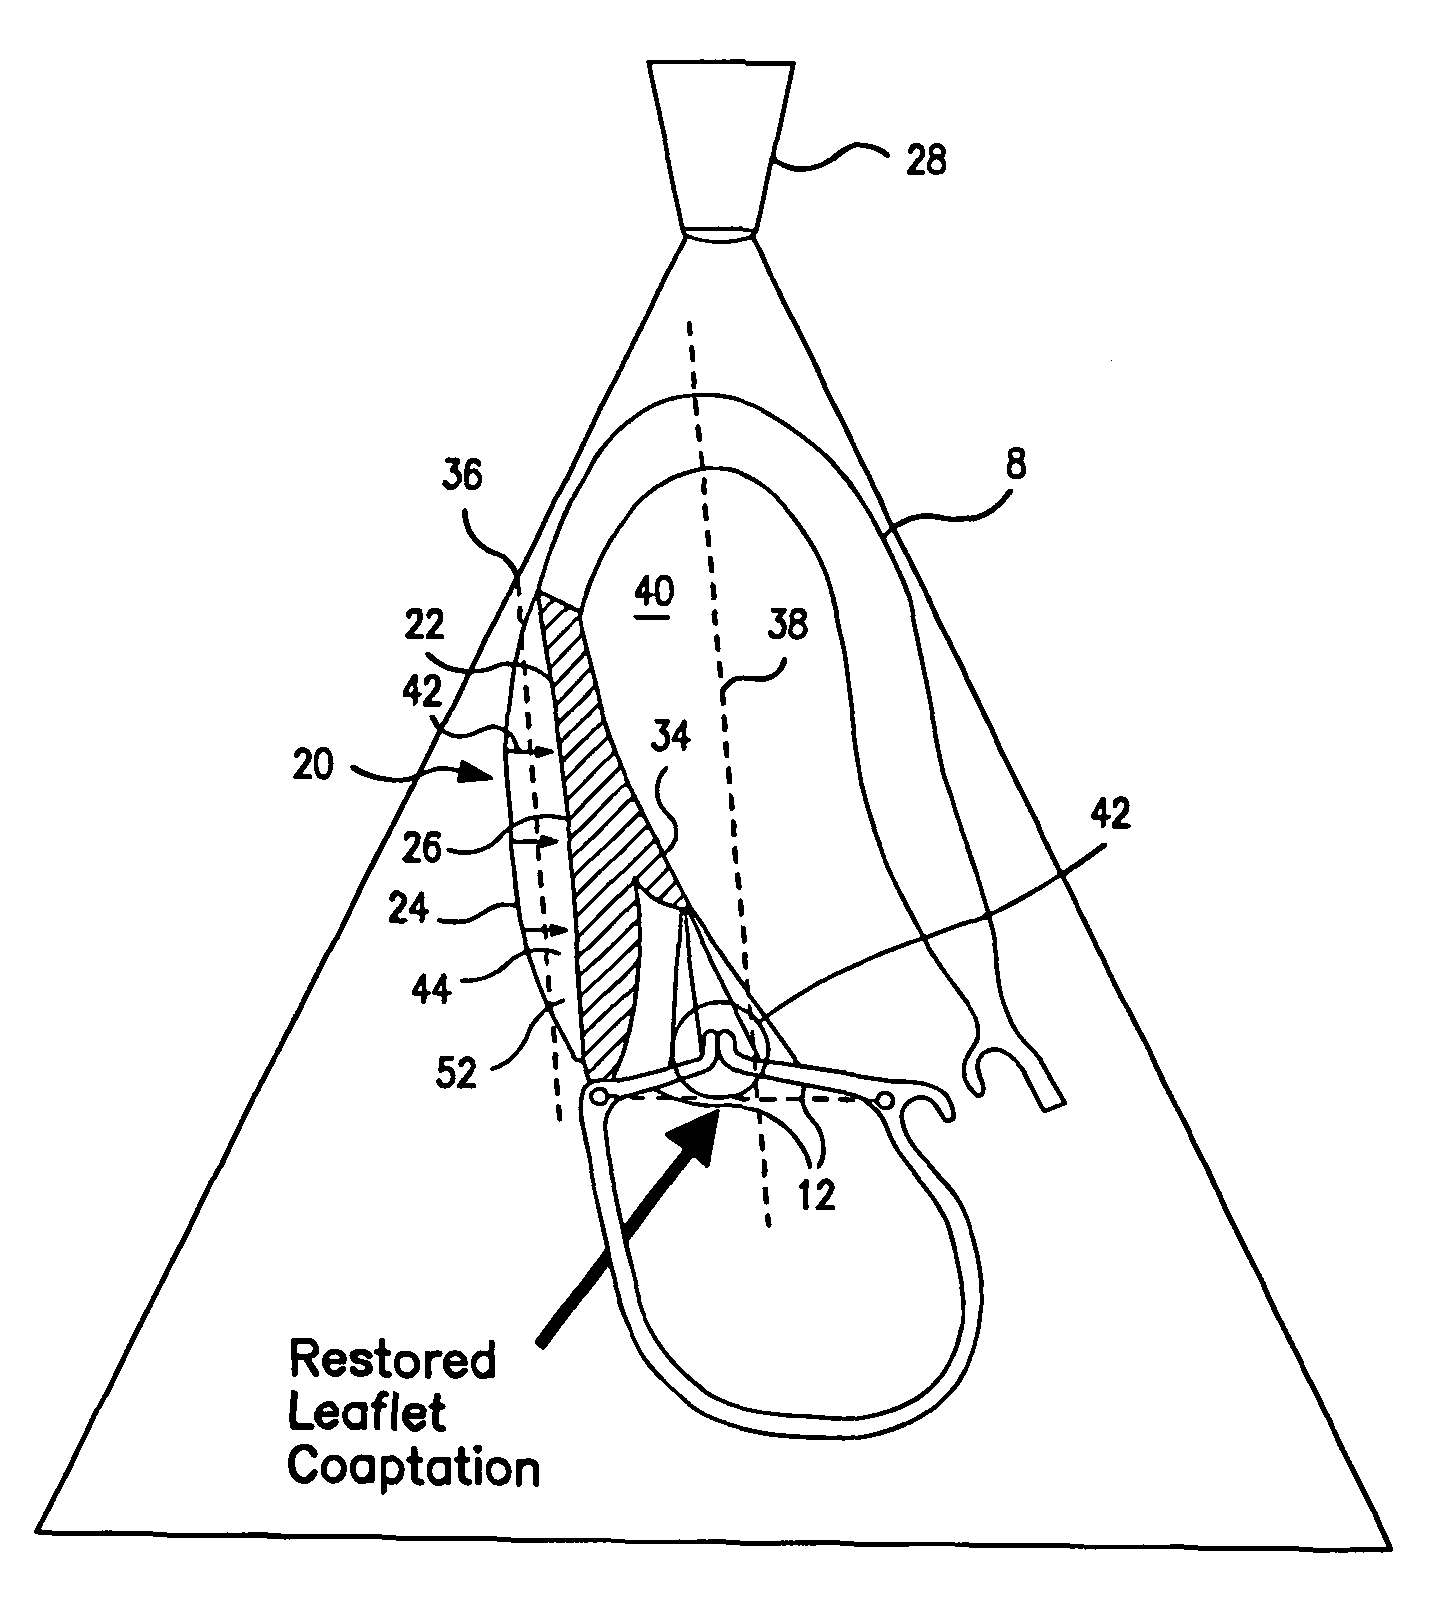 Systems for and methods of repair of atrioventricular valve regurgitation and reversing ventricular remodeling